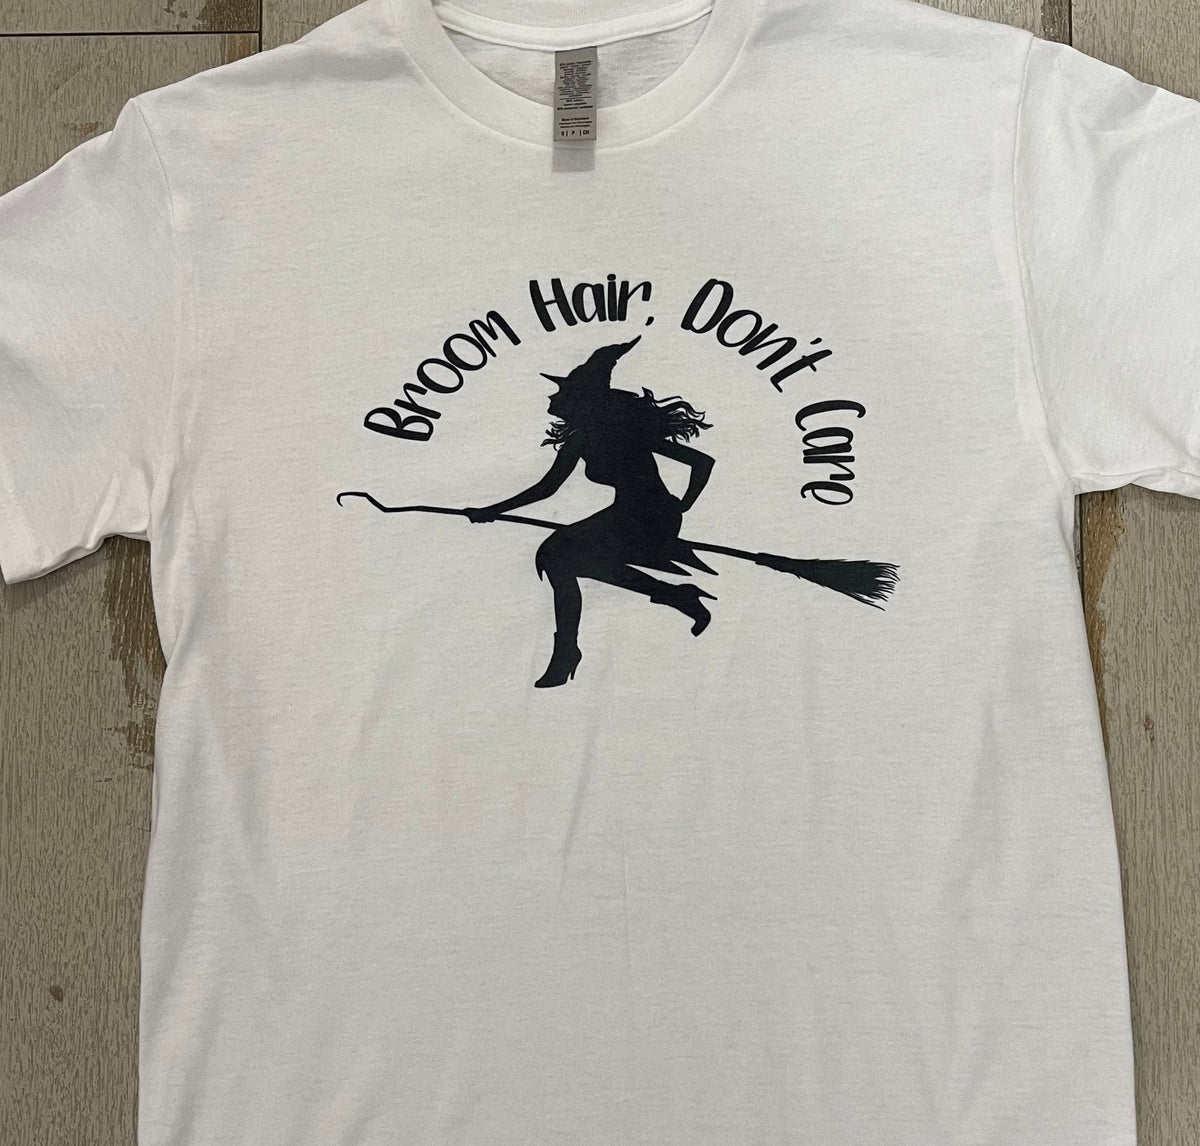 Broom Hair Don't Care Graphic Tee